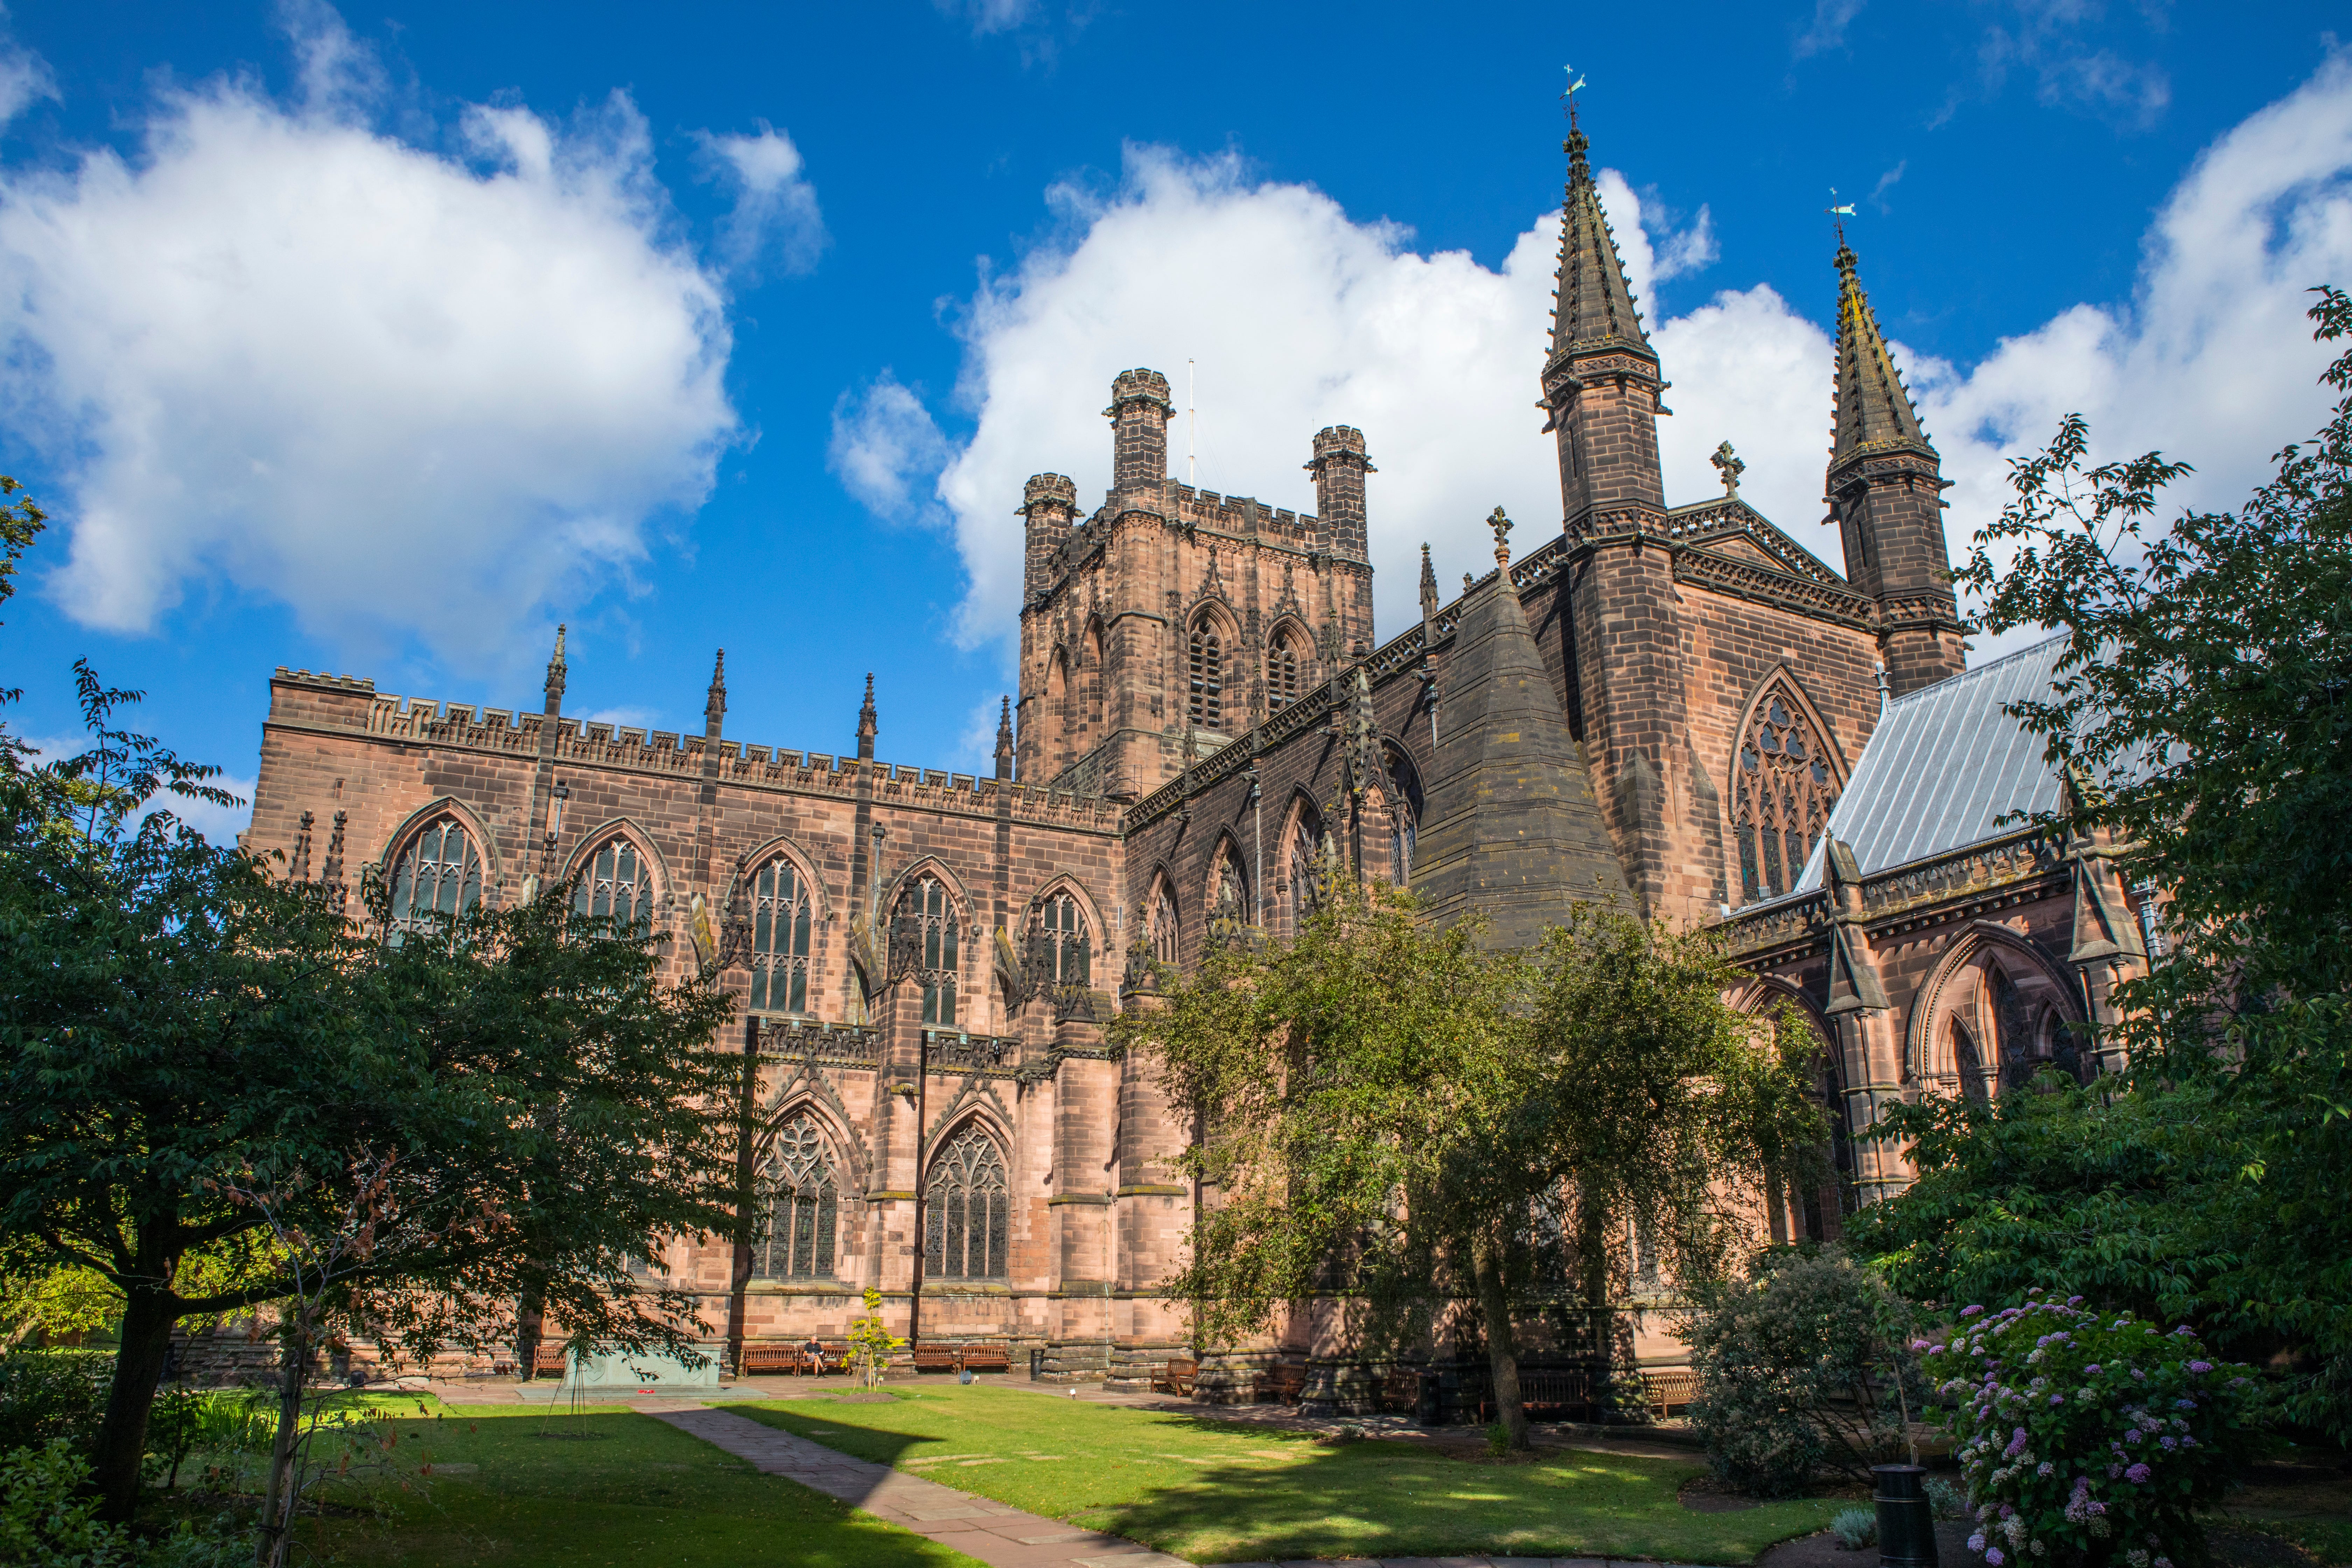 A view of the magnificent Chester Cathedral, in the historic city of Chester in Cheshire, UK